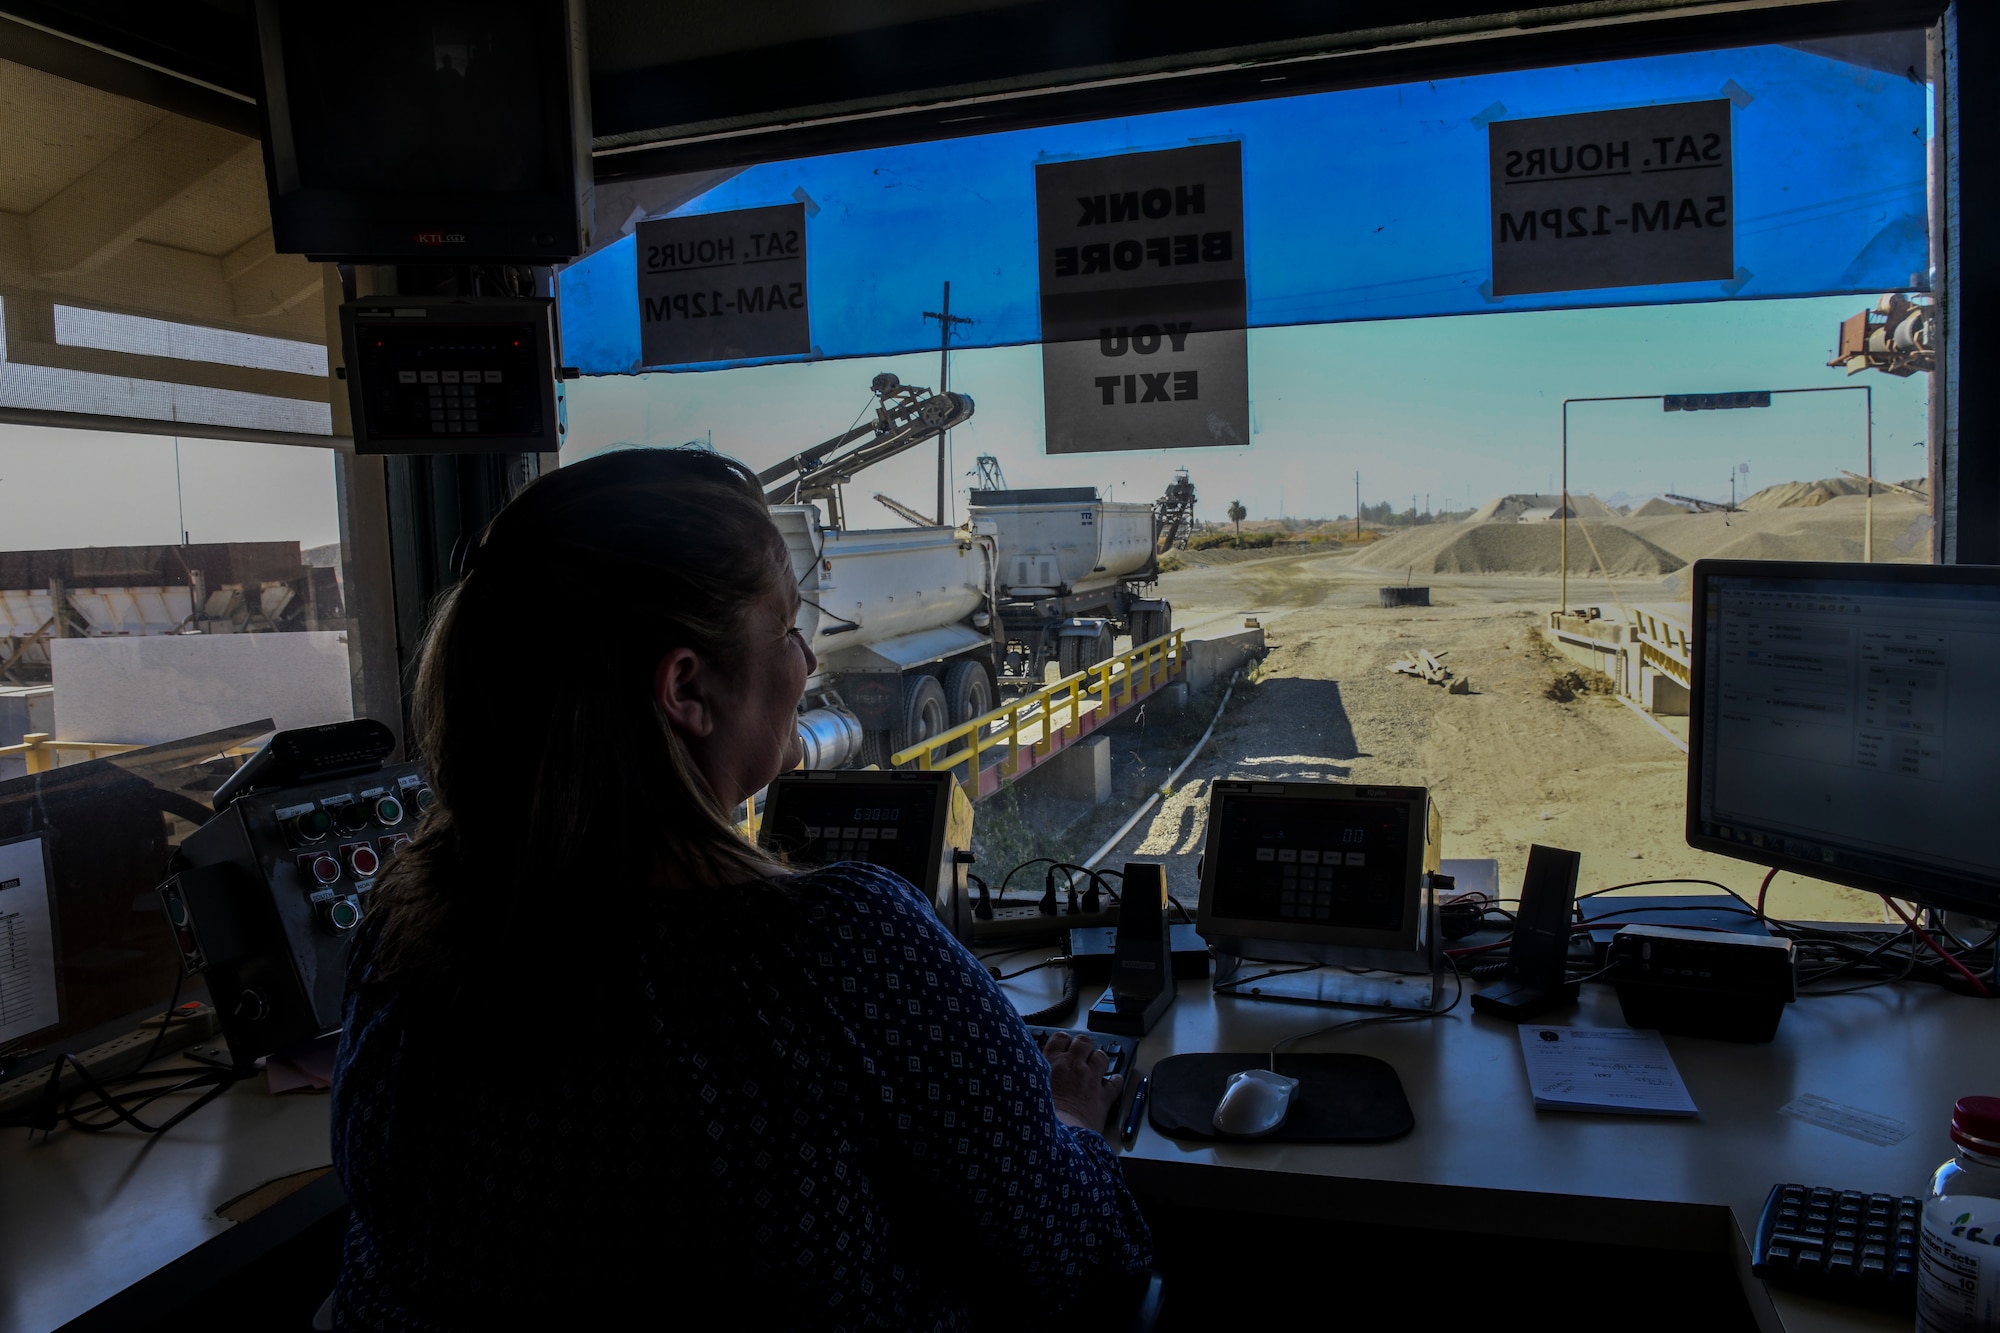 Lana Sharp, Western Aggregates weight master, communicates with trucks in Marysville, California, Oct. 10, 2019. The weight master logs their information into the system as they leave the construction yard. (U.S. Air Force Photo by Senior Airman Colville McFee)